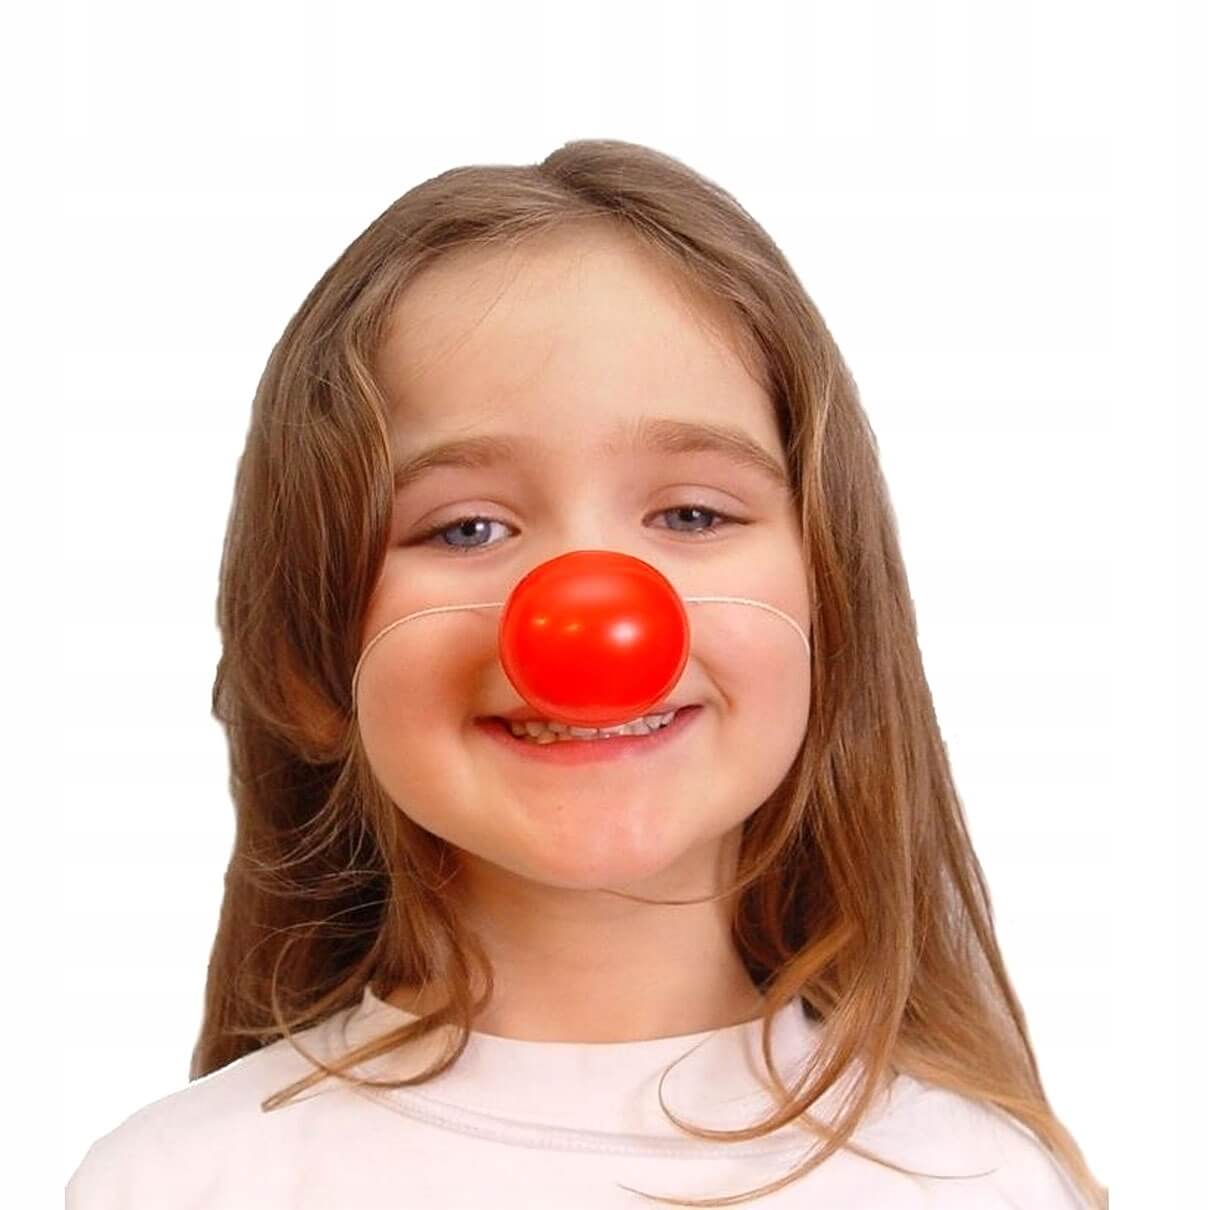 The Emergency Clown Nose